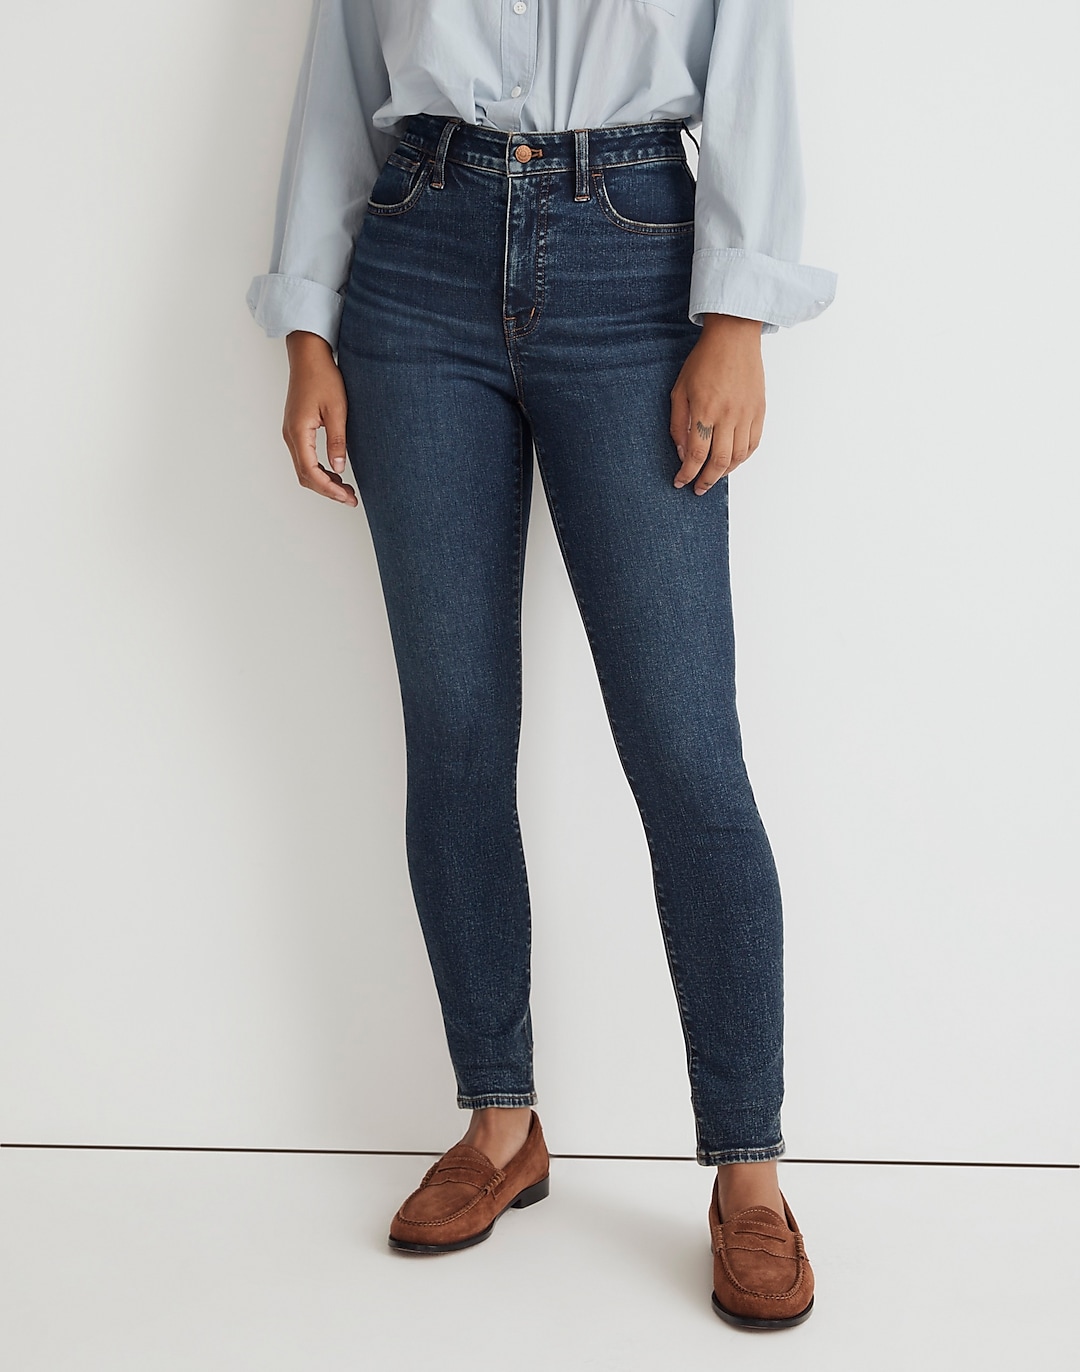 Curvy Roadtripper Authentic Skinny Jeans in Litchfield Wash | Madewell